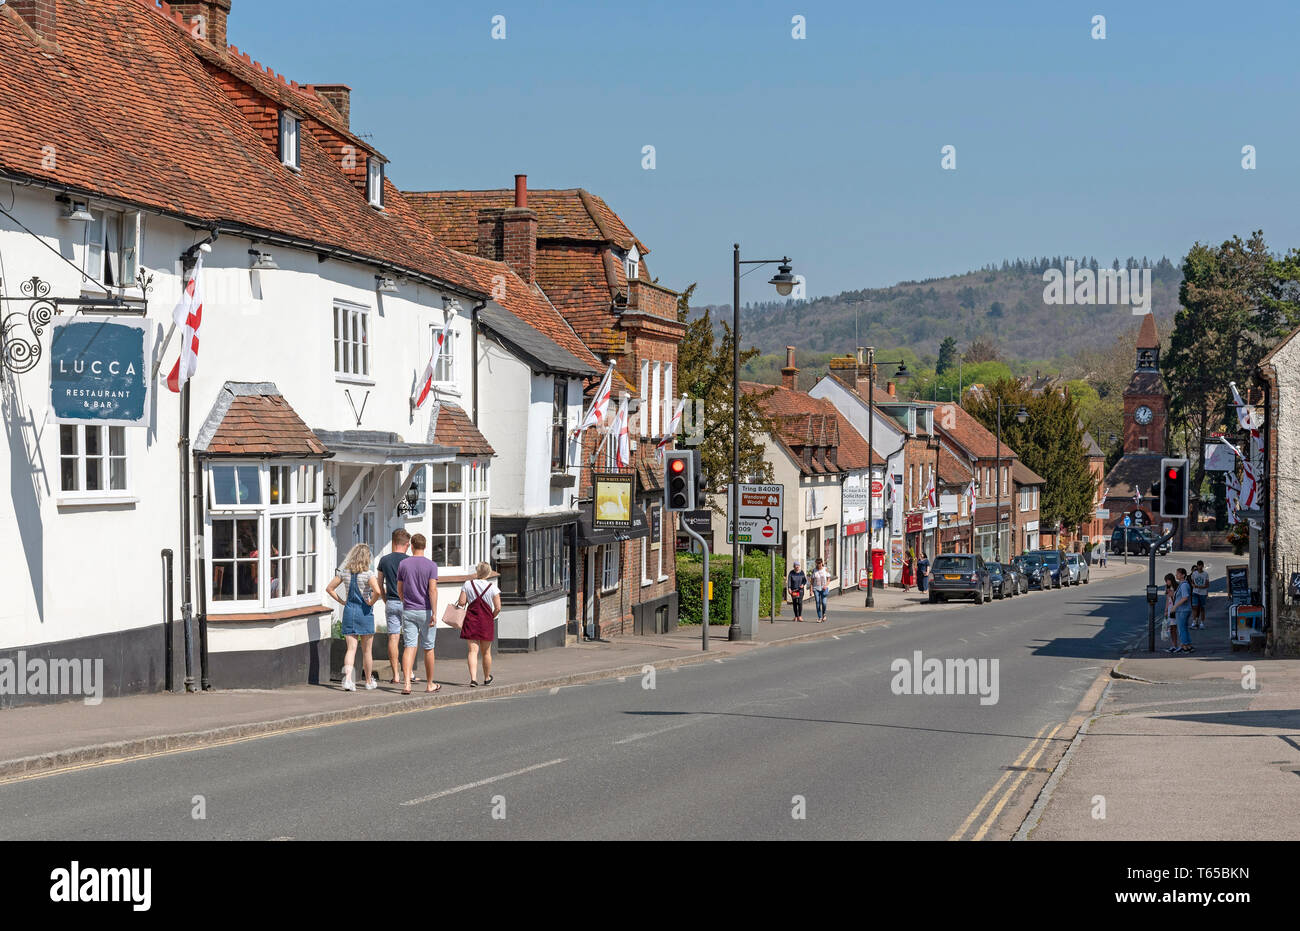 Wendover, Buckinghamshire, England, UK. April 2019. High Street, Wendover in The Chiltern Hills area. A market town with Clock Tower dating from 1842. Stock Photo